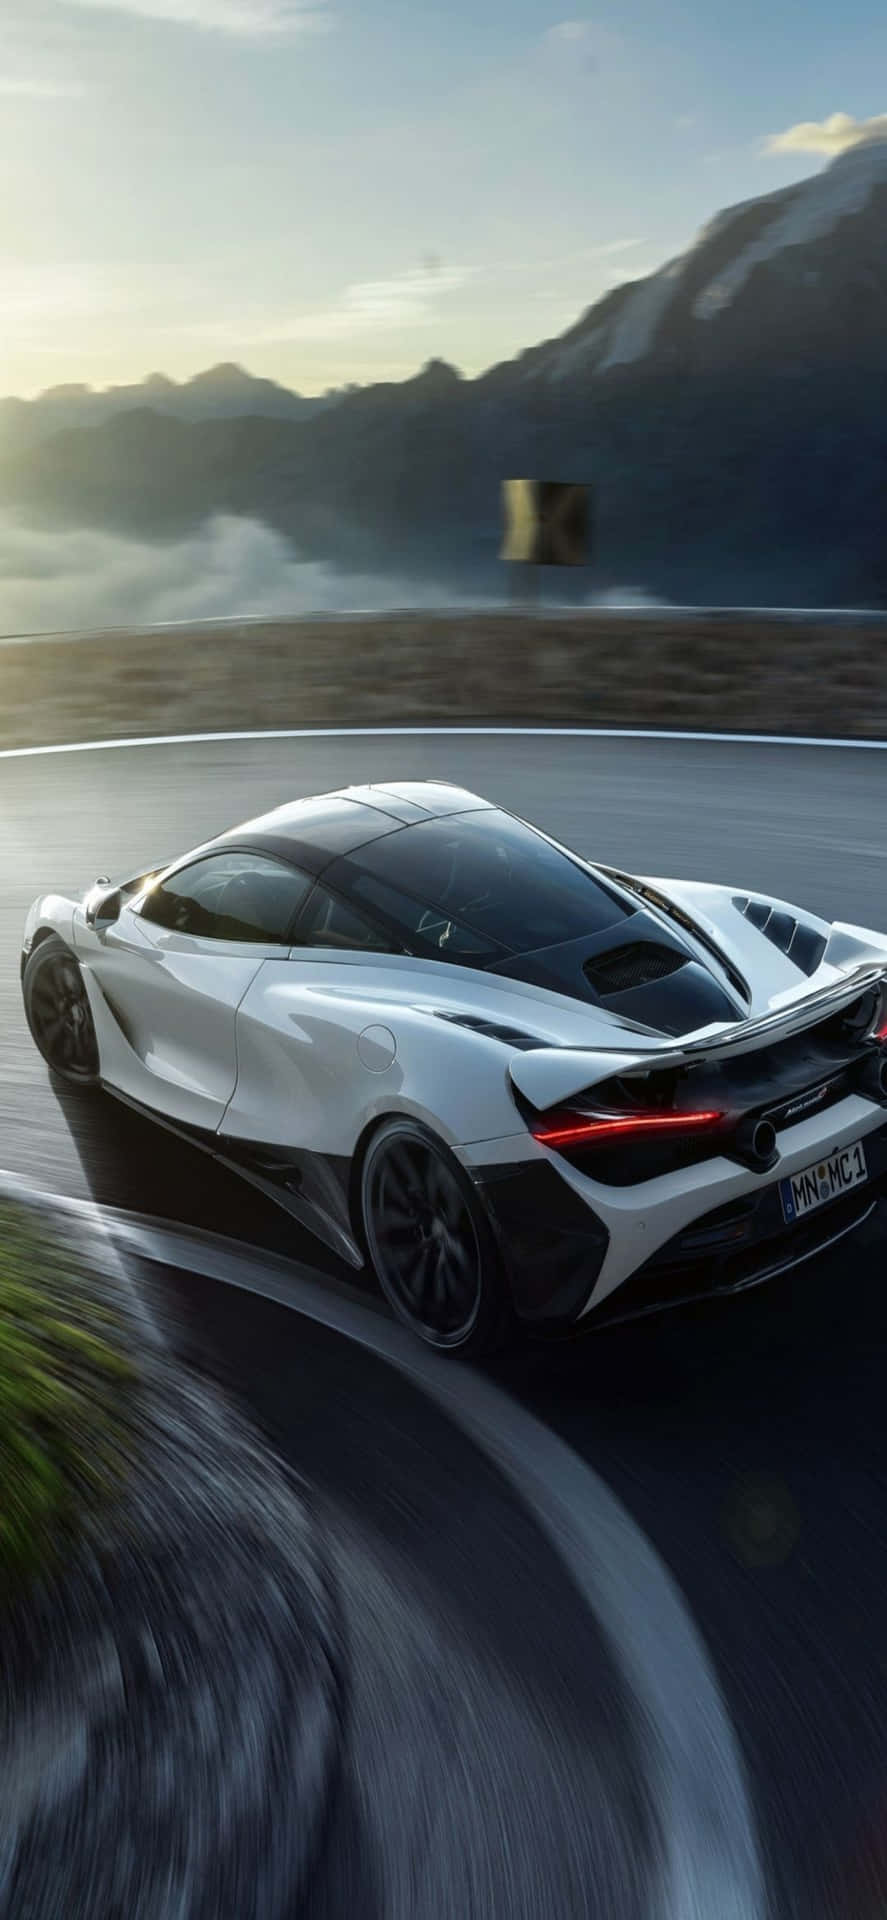 Supercharge Your Life with the Iphone Xs&Mclaren 720s